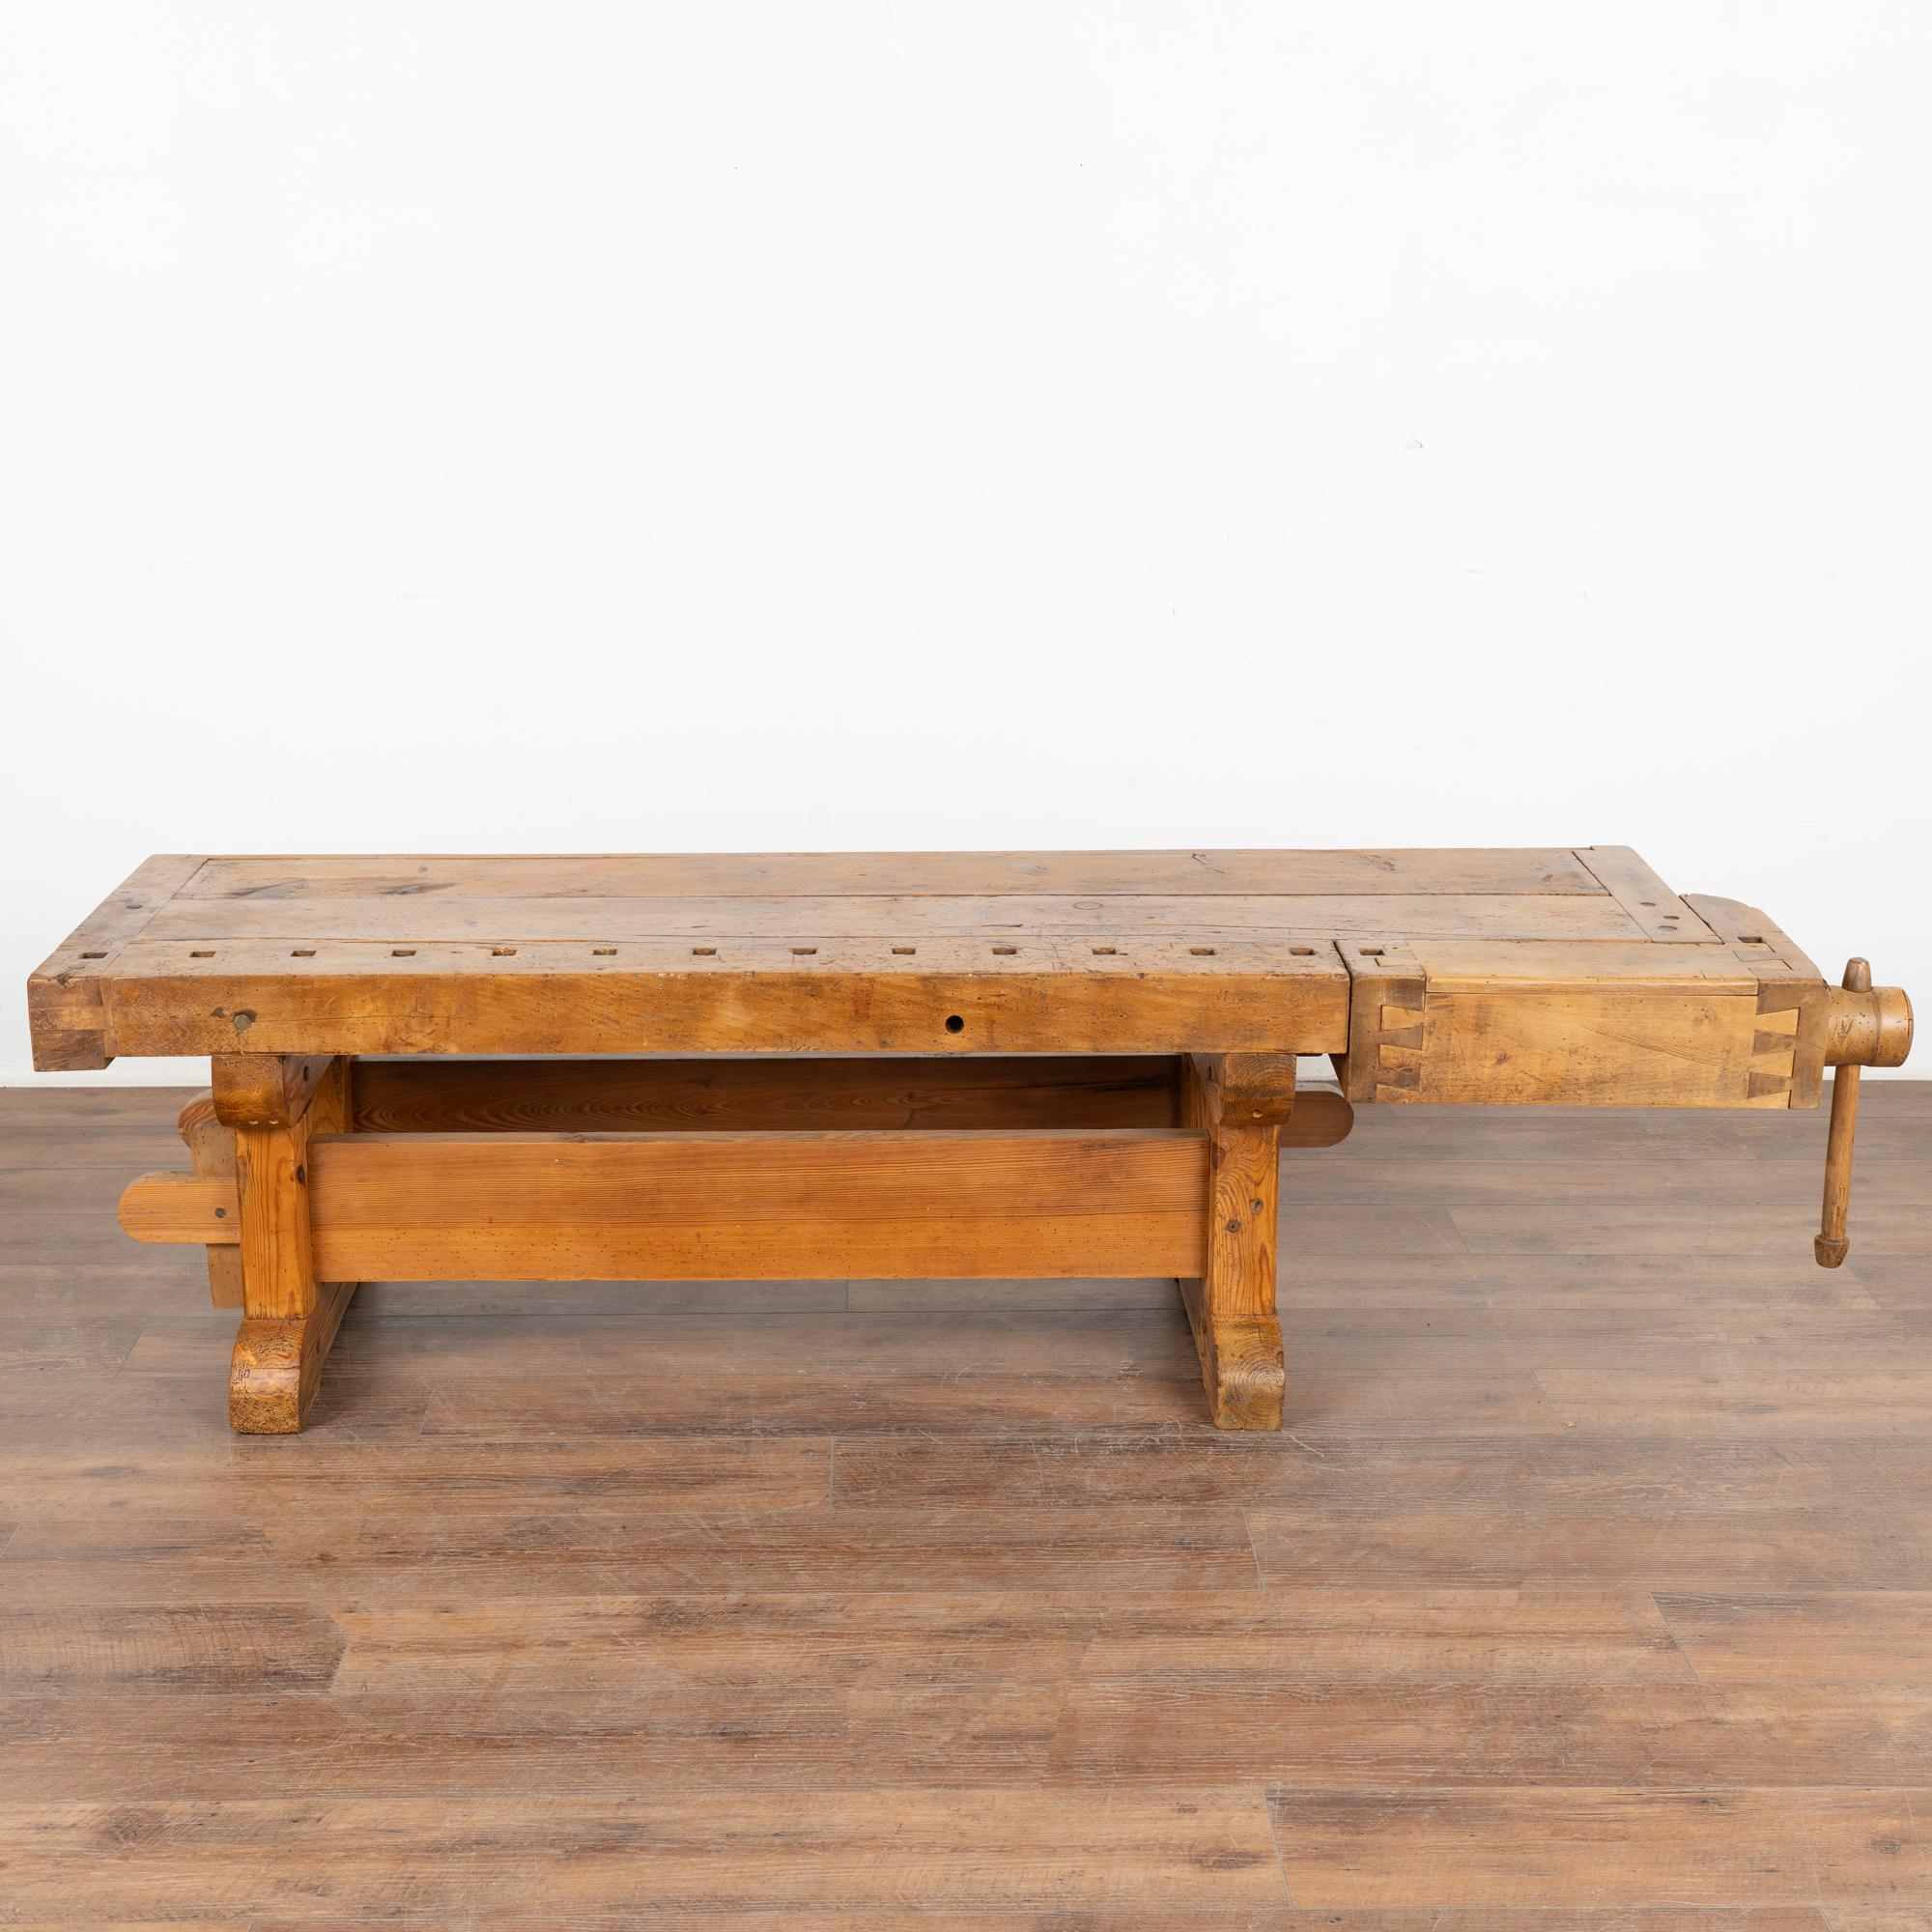 Hungarian Rustic Coffee Table Made from Carpenters Workbench, Denmark circa 1920